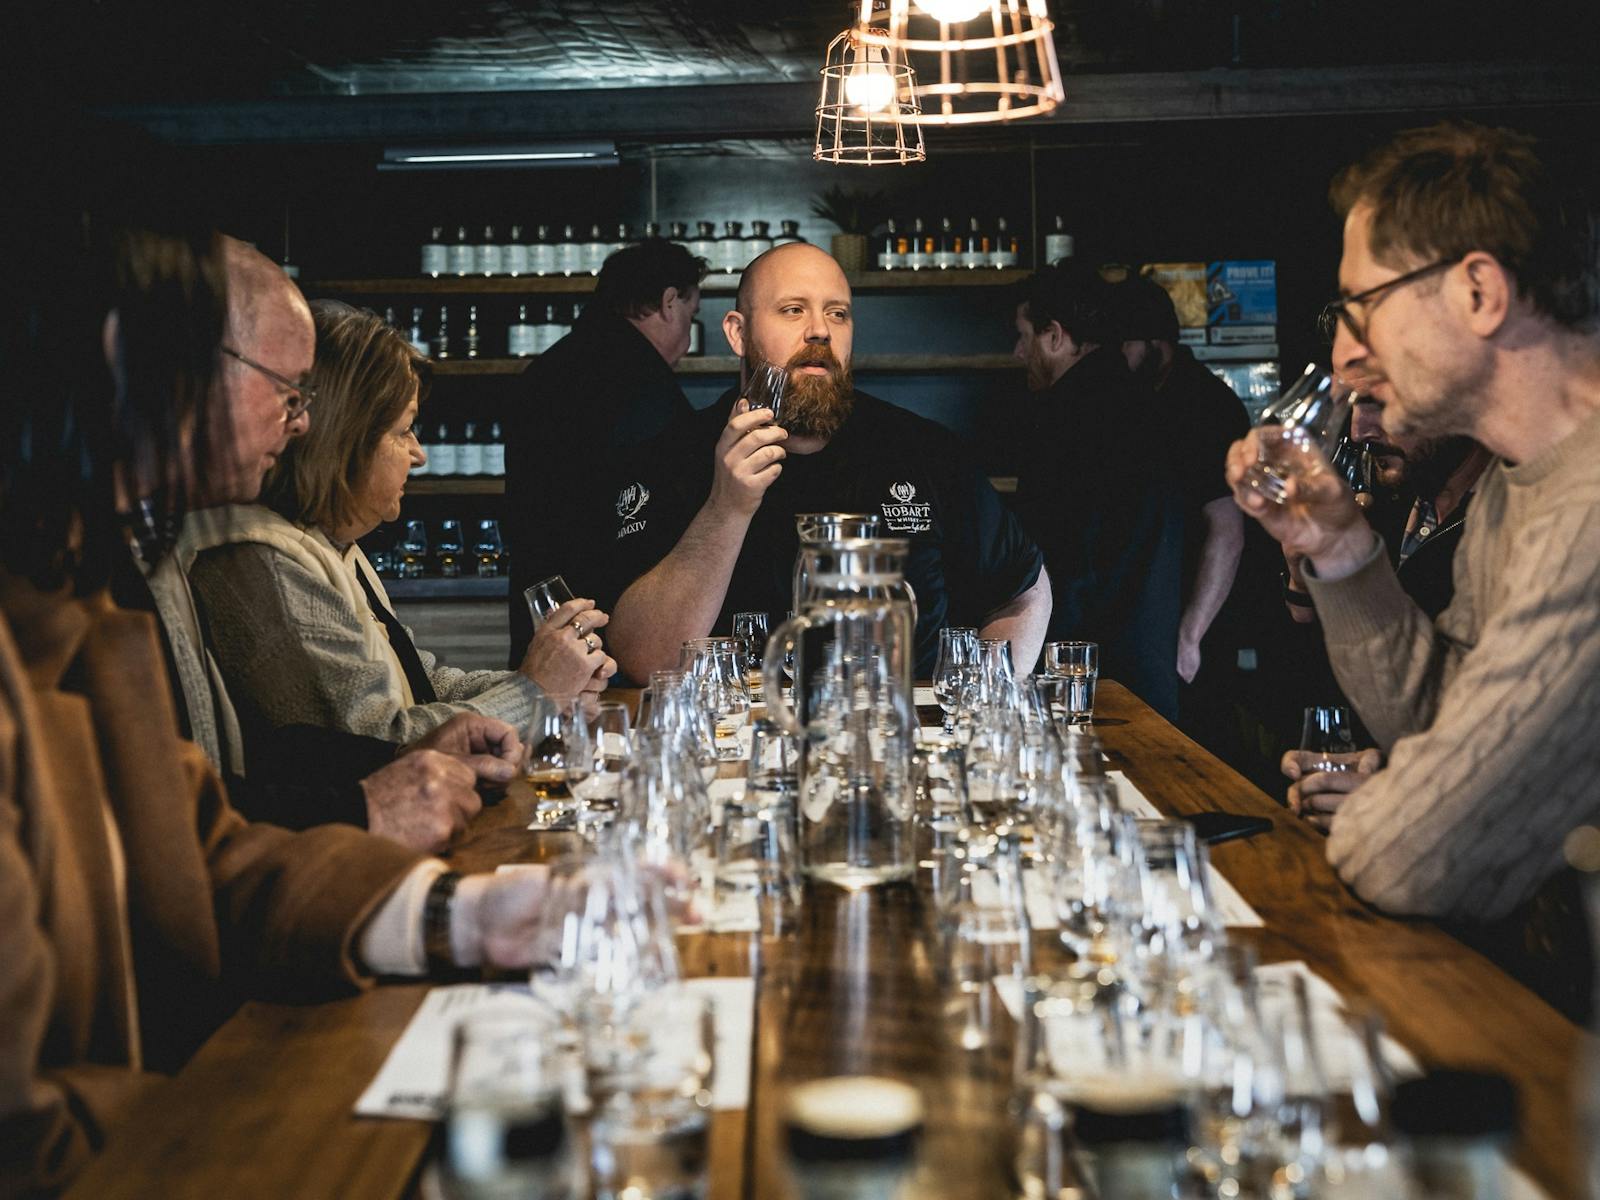 Meet the characters within the Tasmanian Whisky industry